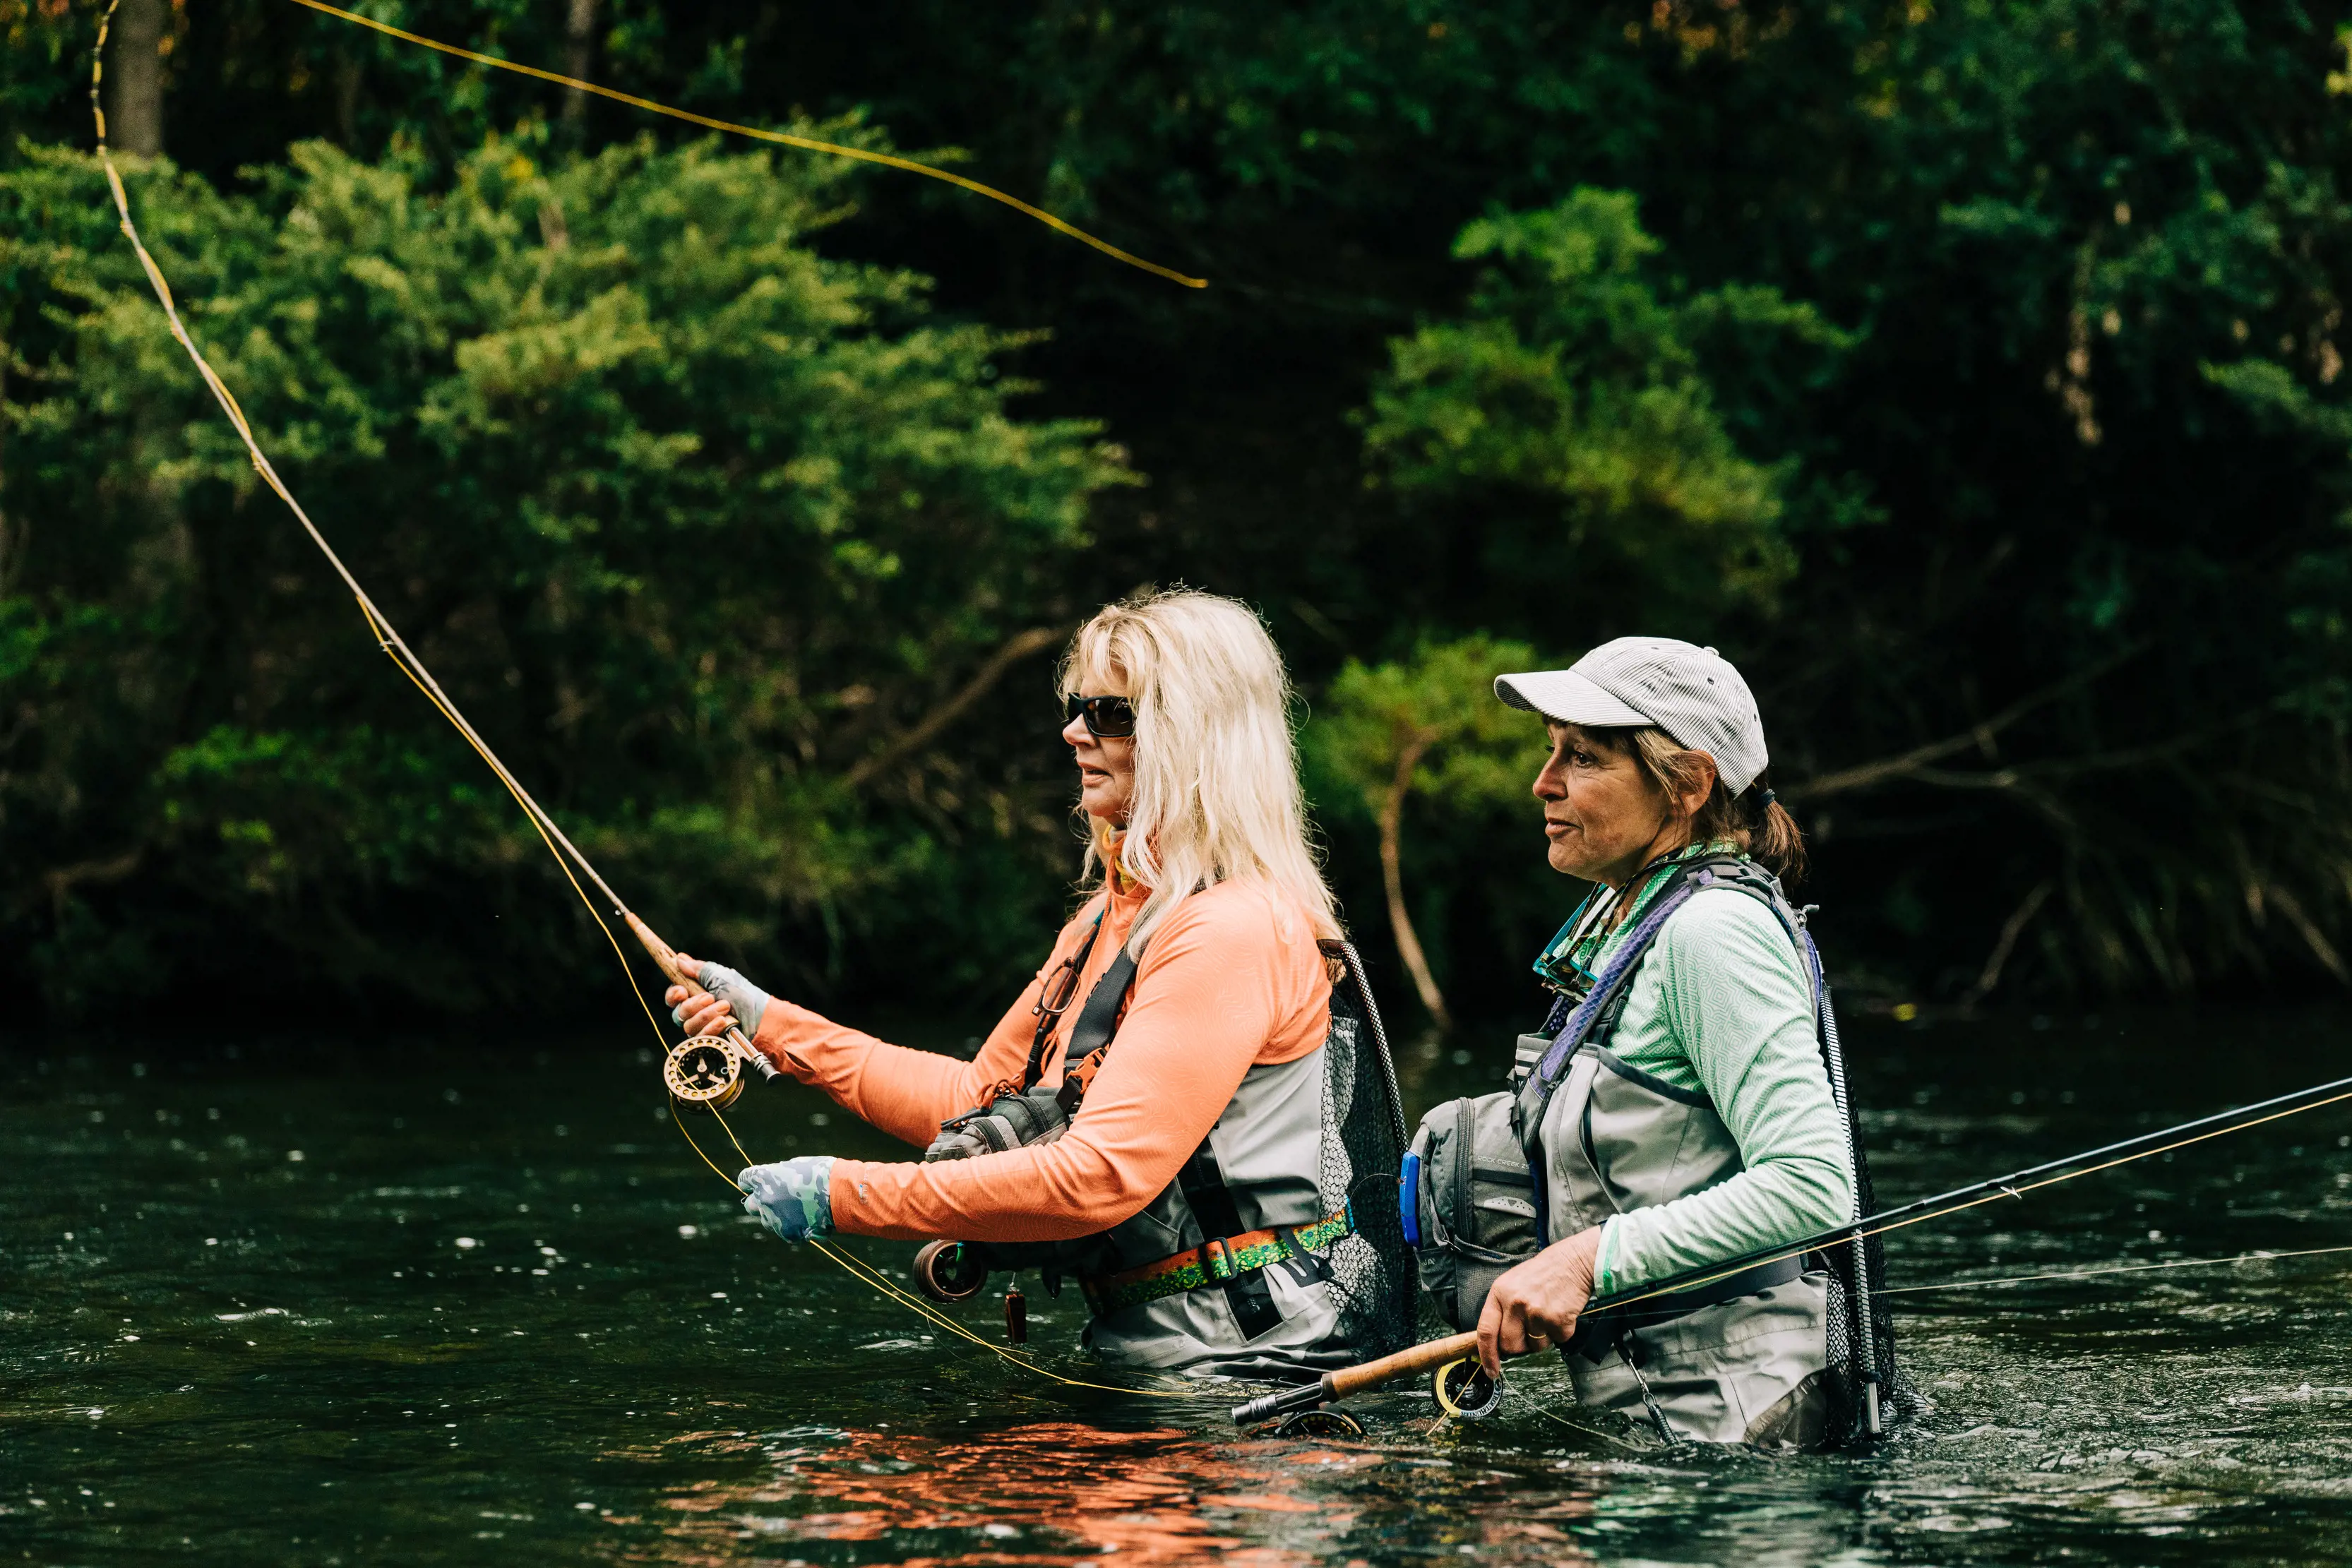 Fly Fishing Events - United Women on the Fly